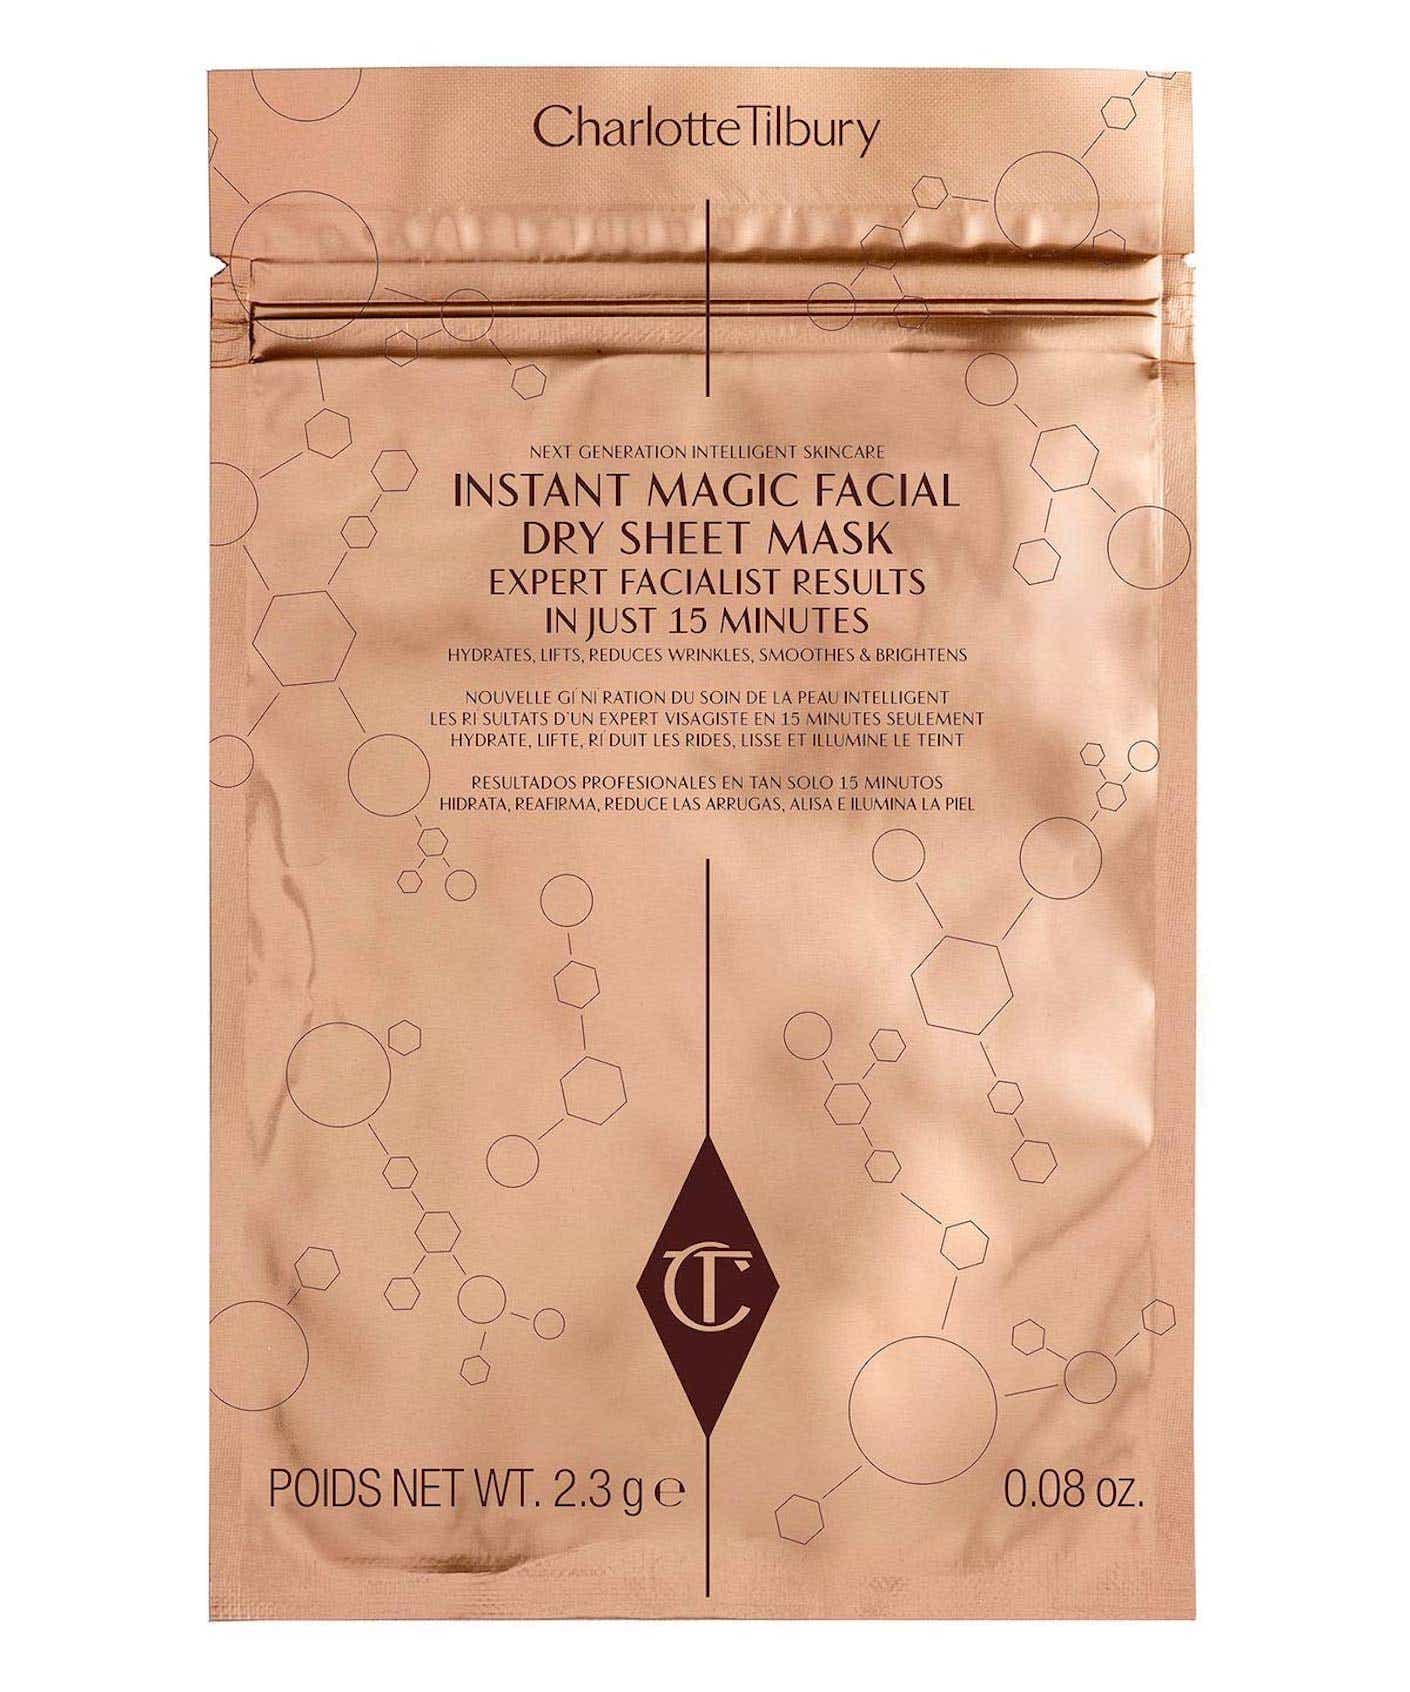 A bronze, plastic package of sheet masks is pictured lying flat.